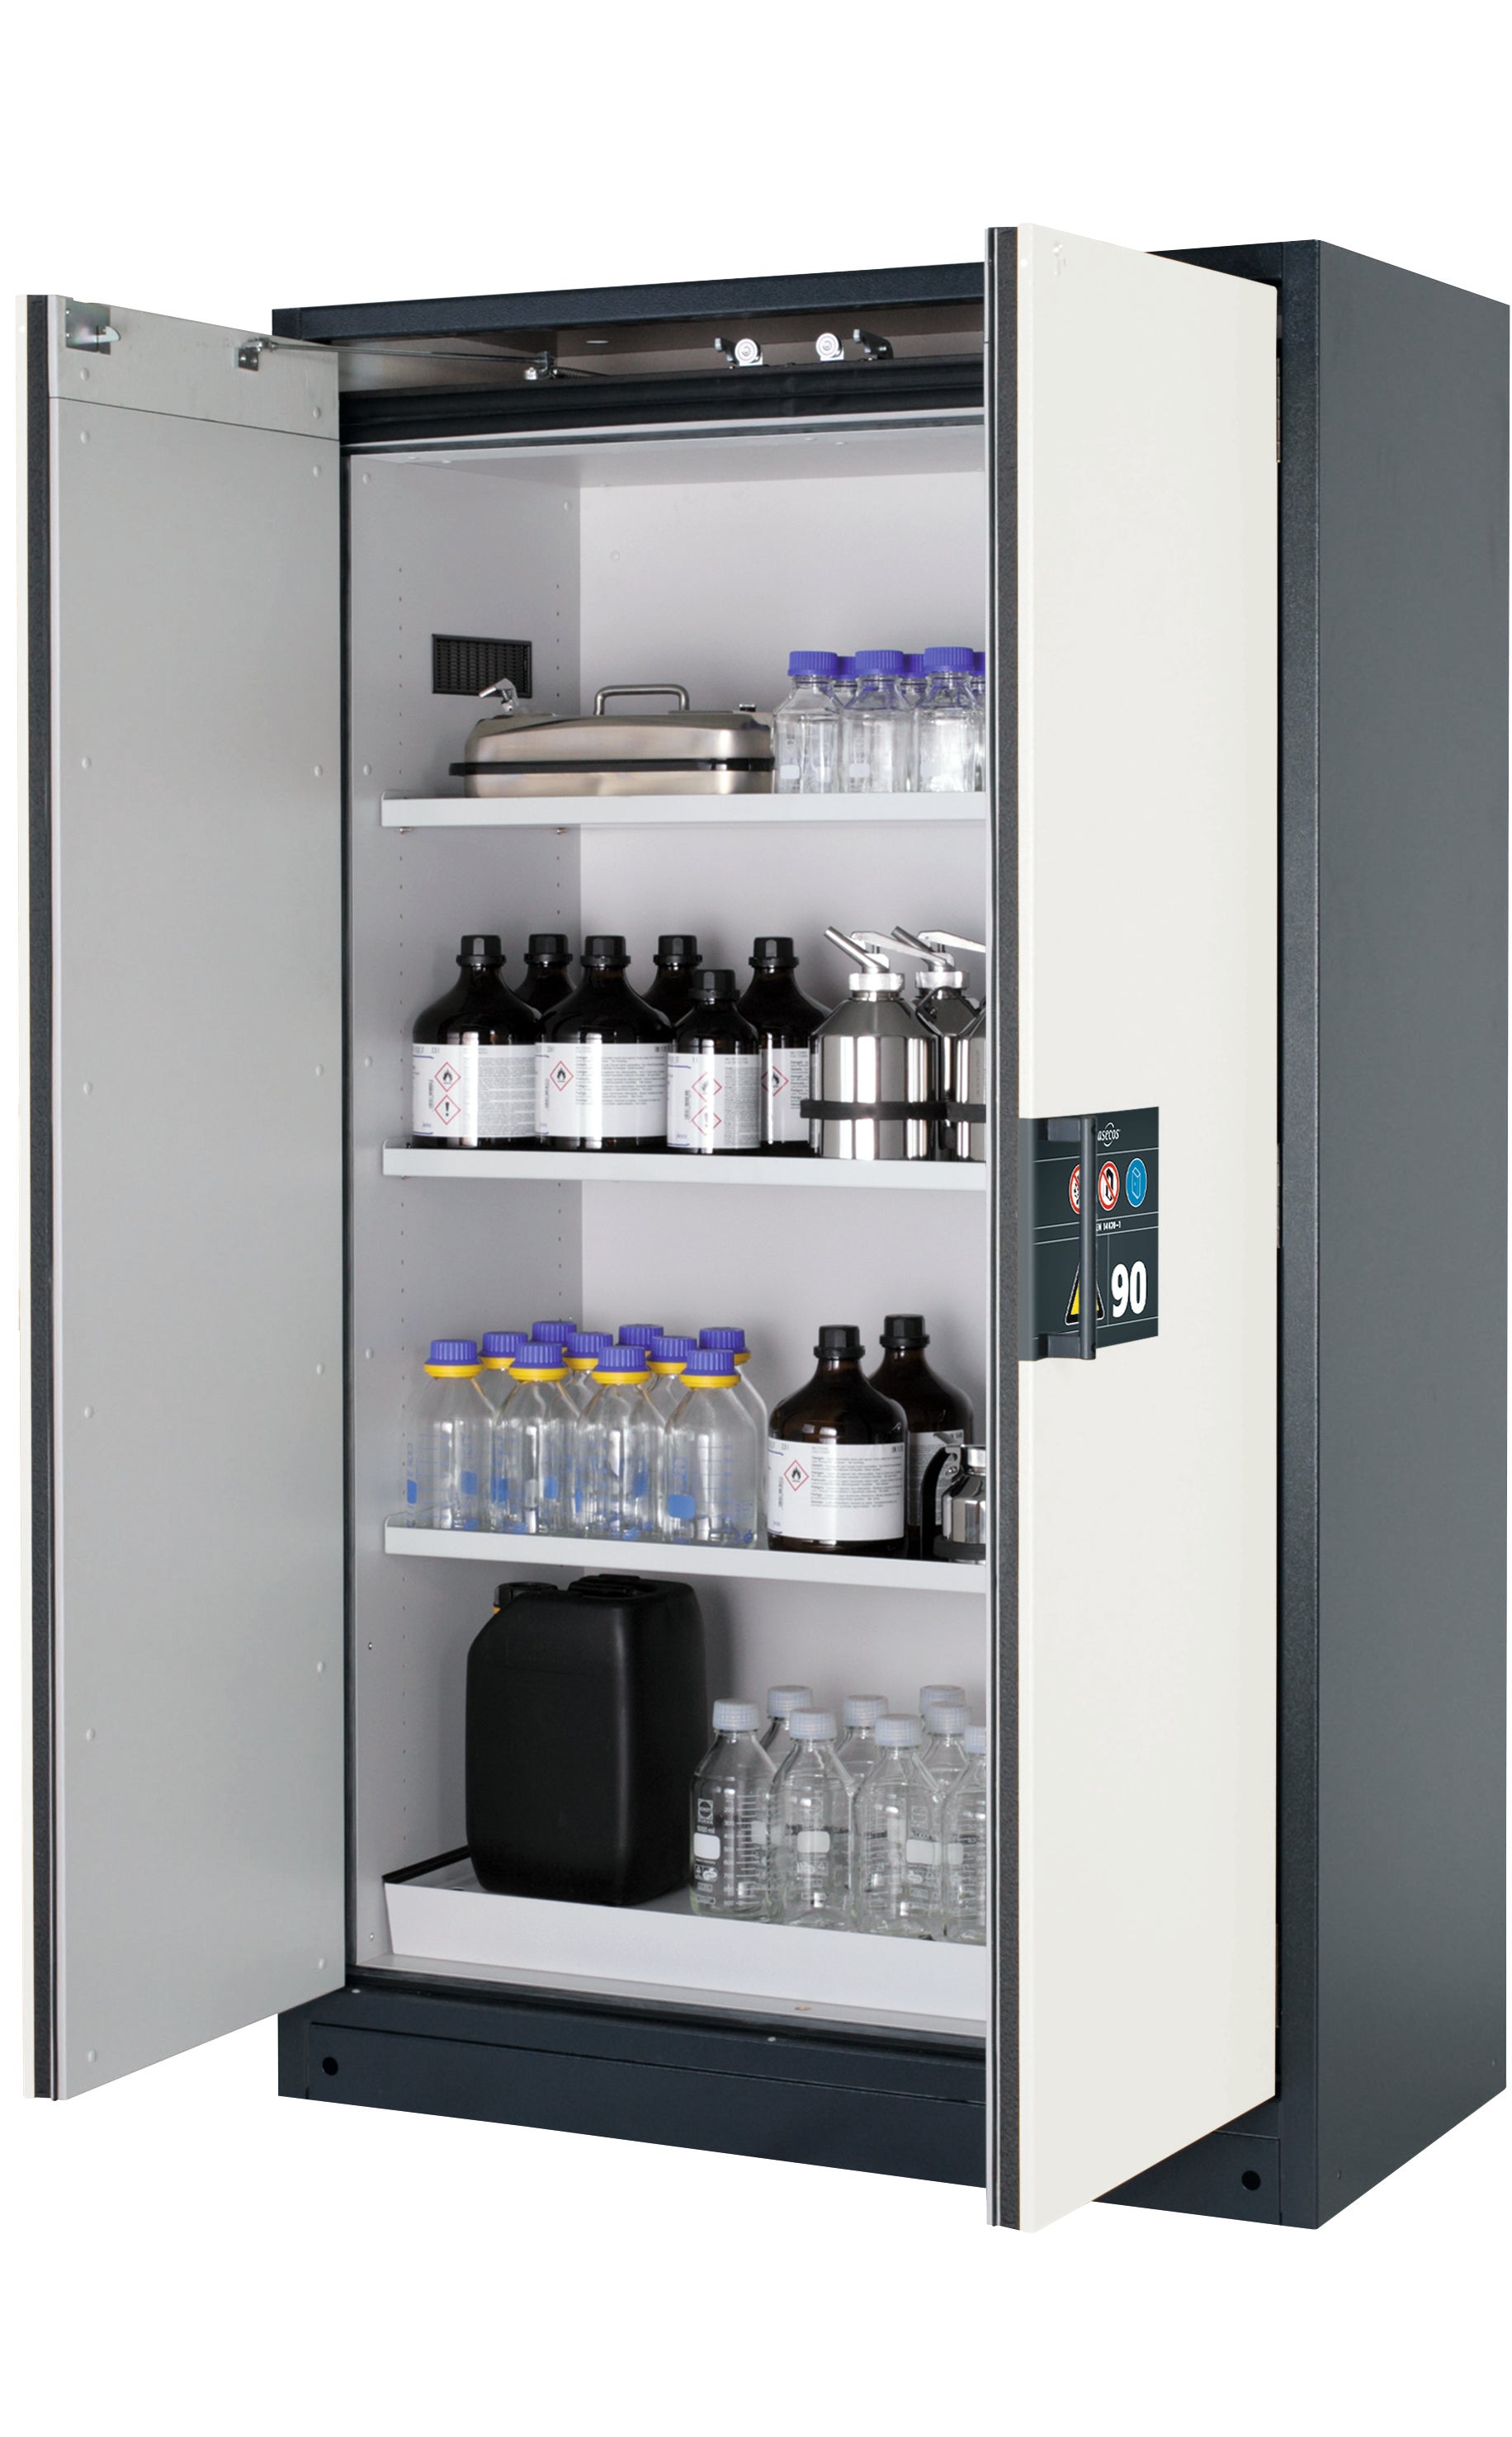 Type 90 safety storage cabinet Q-CLASSIC-90 model Q90.195.120 in pure white RAL 9010 with 3x tray shelf (standard) (sheet steel),